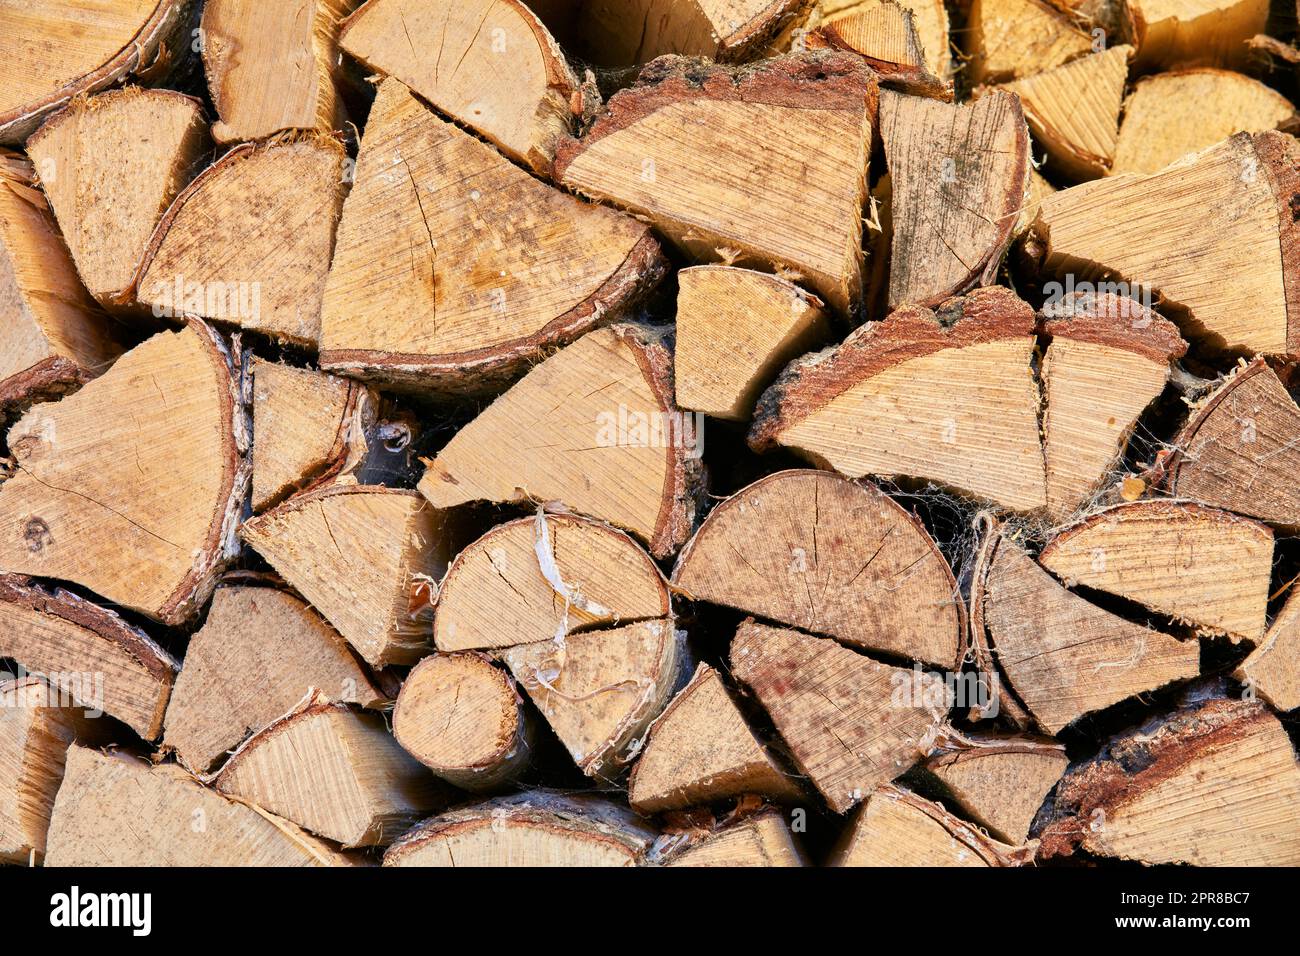 Wood chopped up and stacked into a storage pile. Collecting firewood as a source of energy. Different sizes and shapes of logs after felling, materials for tools and shelter from above Stock Photo